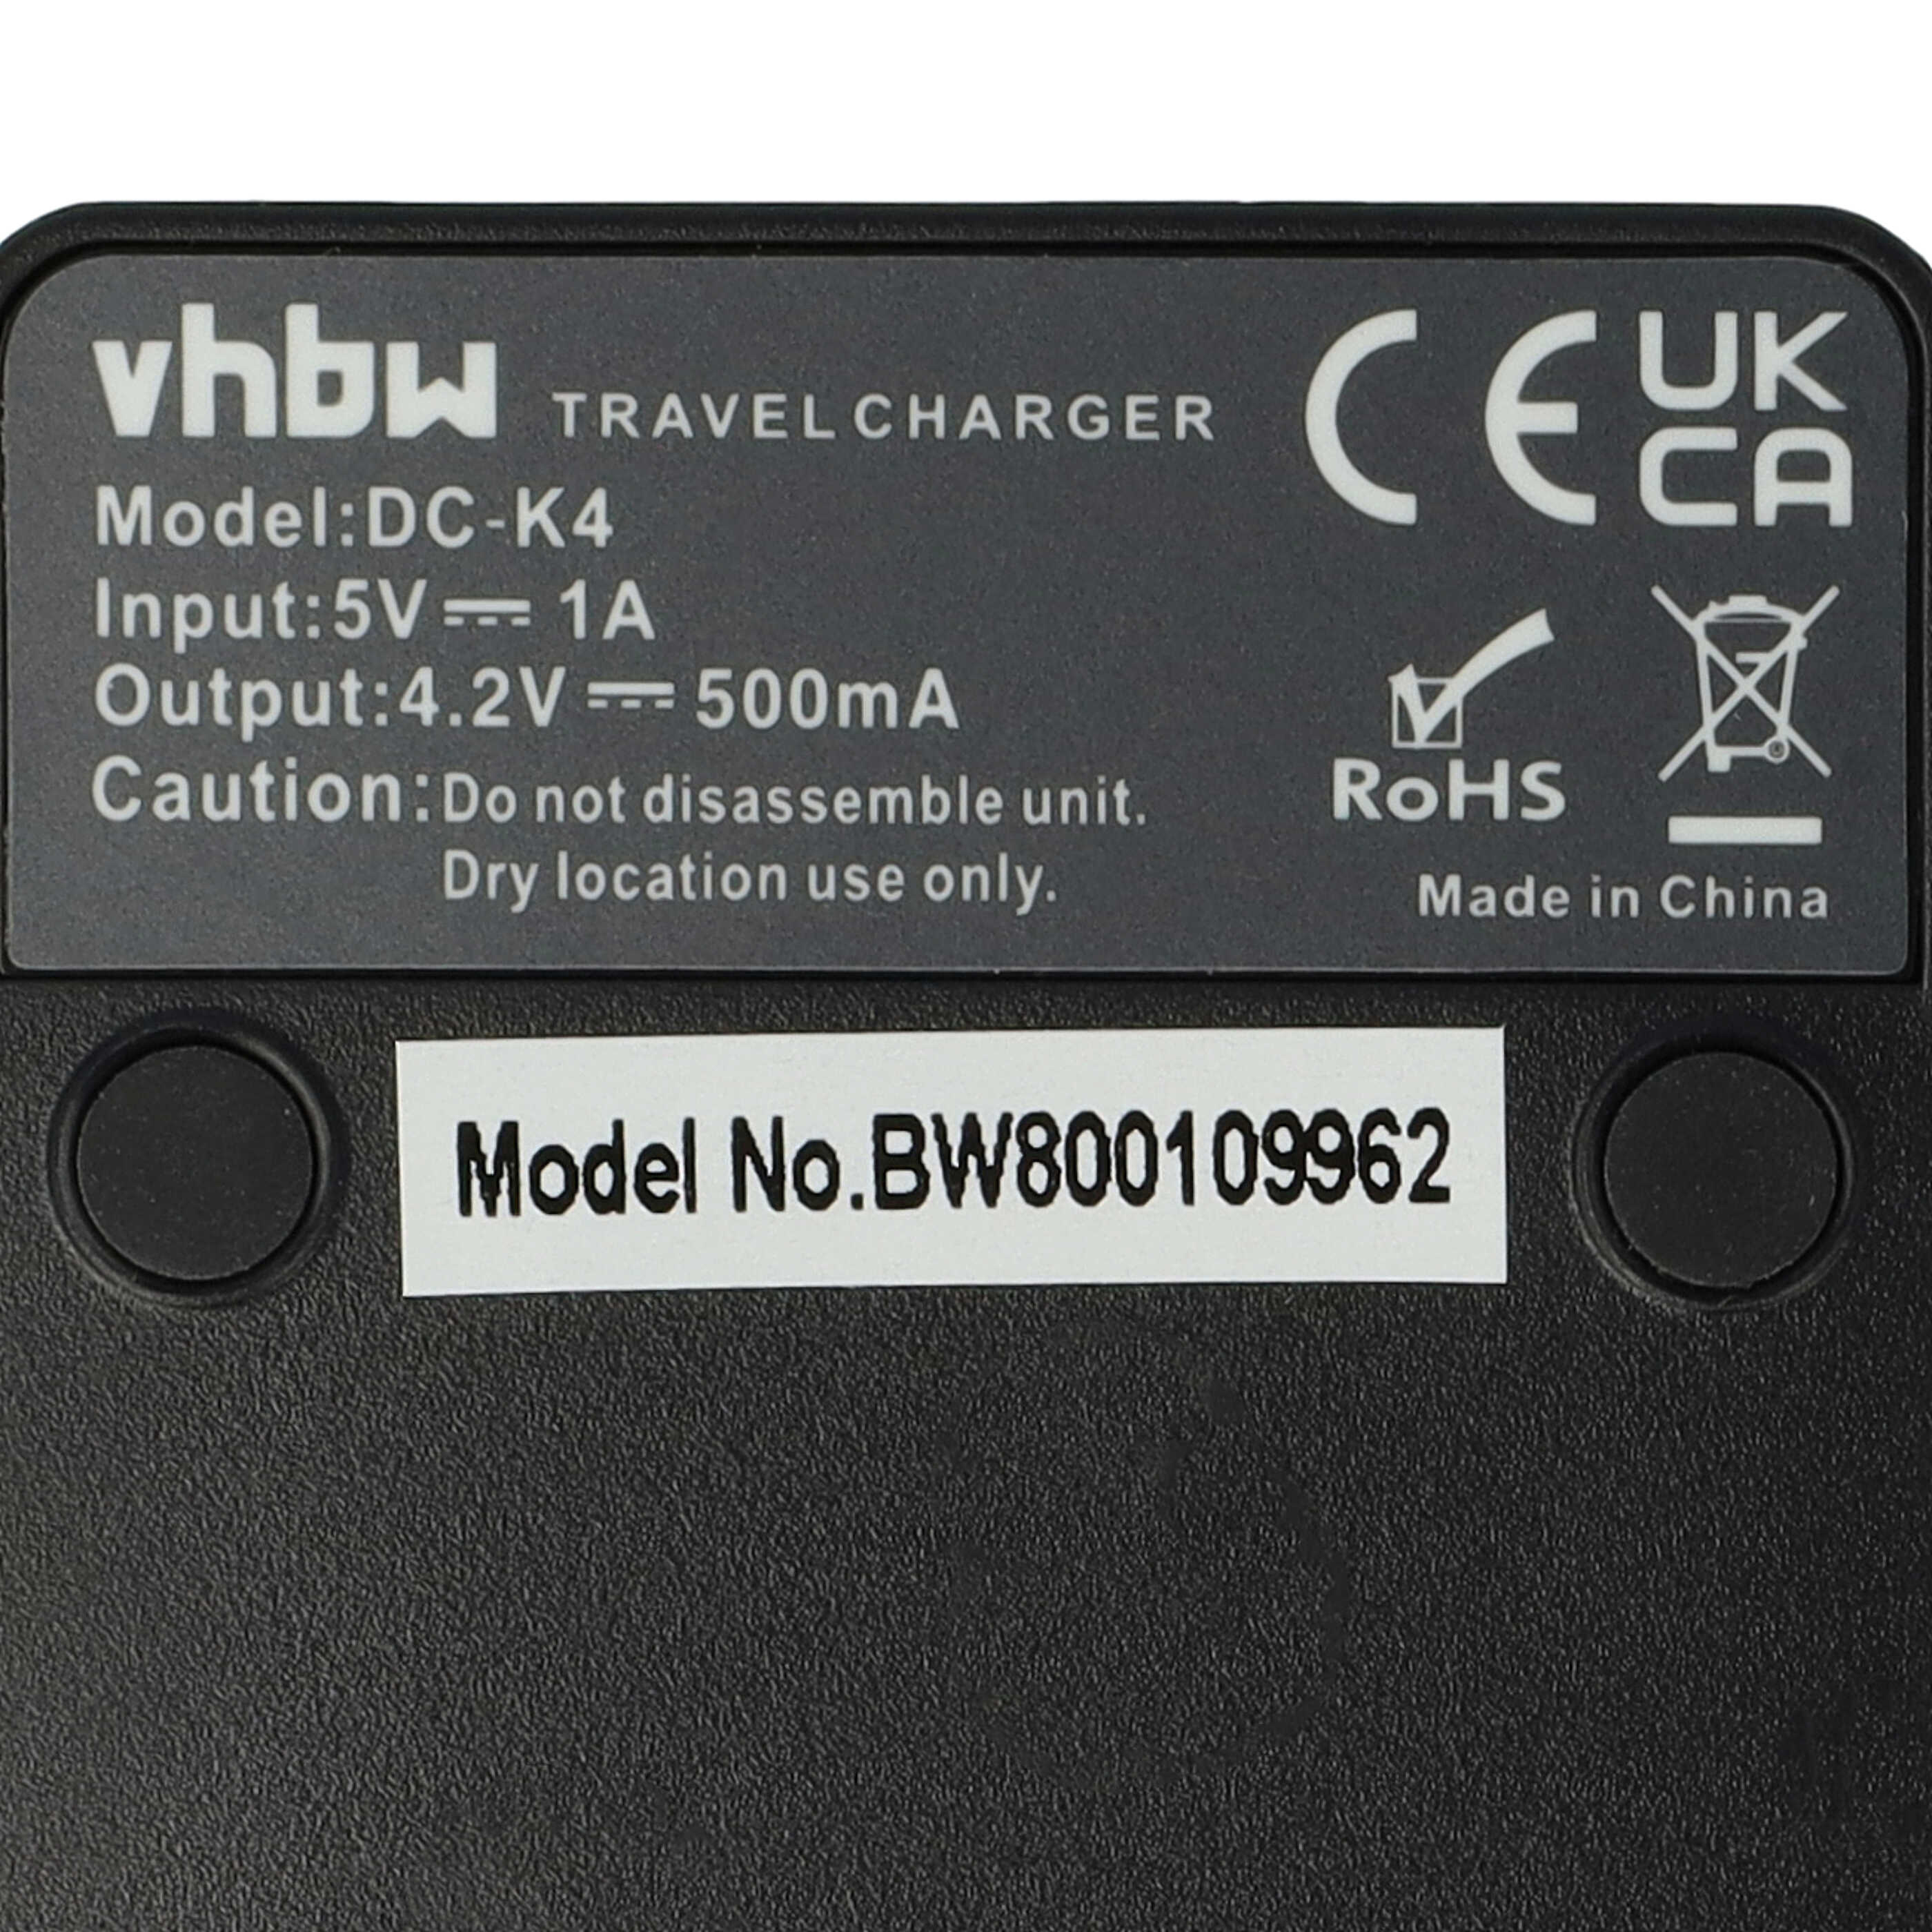 Battery Charger suitable for JVC BN-VG107 Camera etc. - 0.5 A, 4.2 V